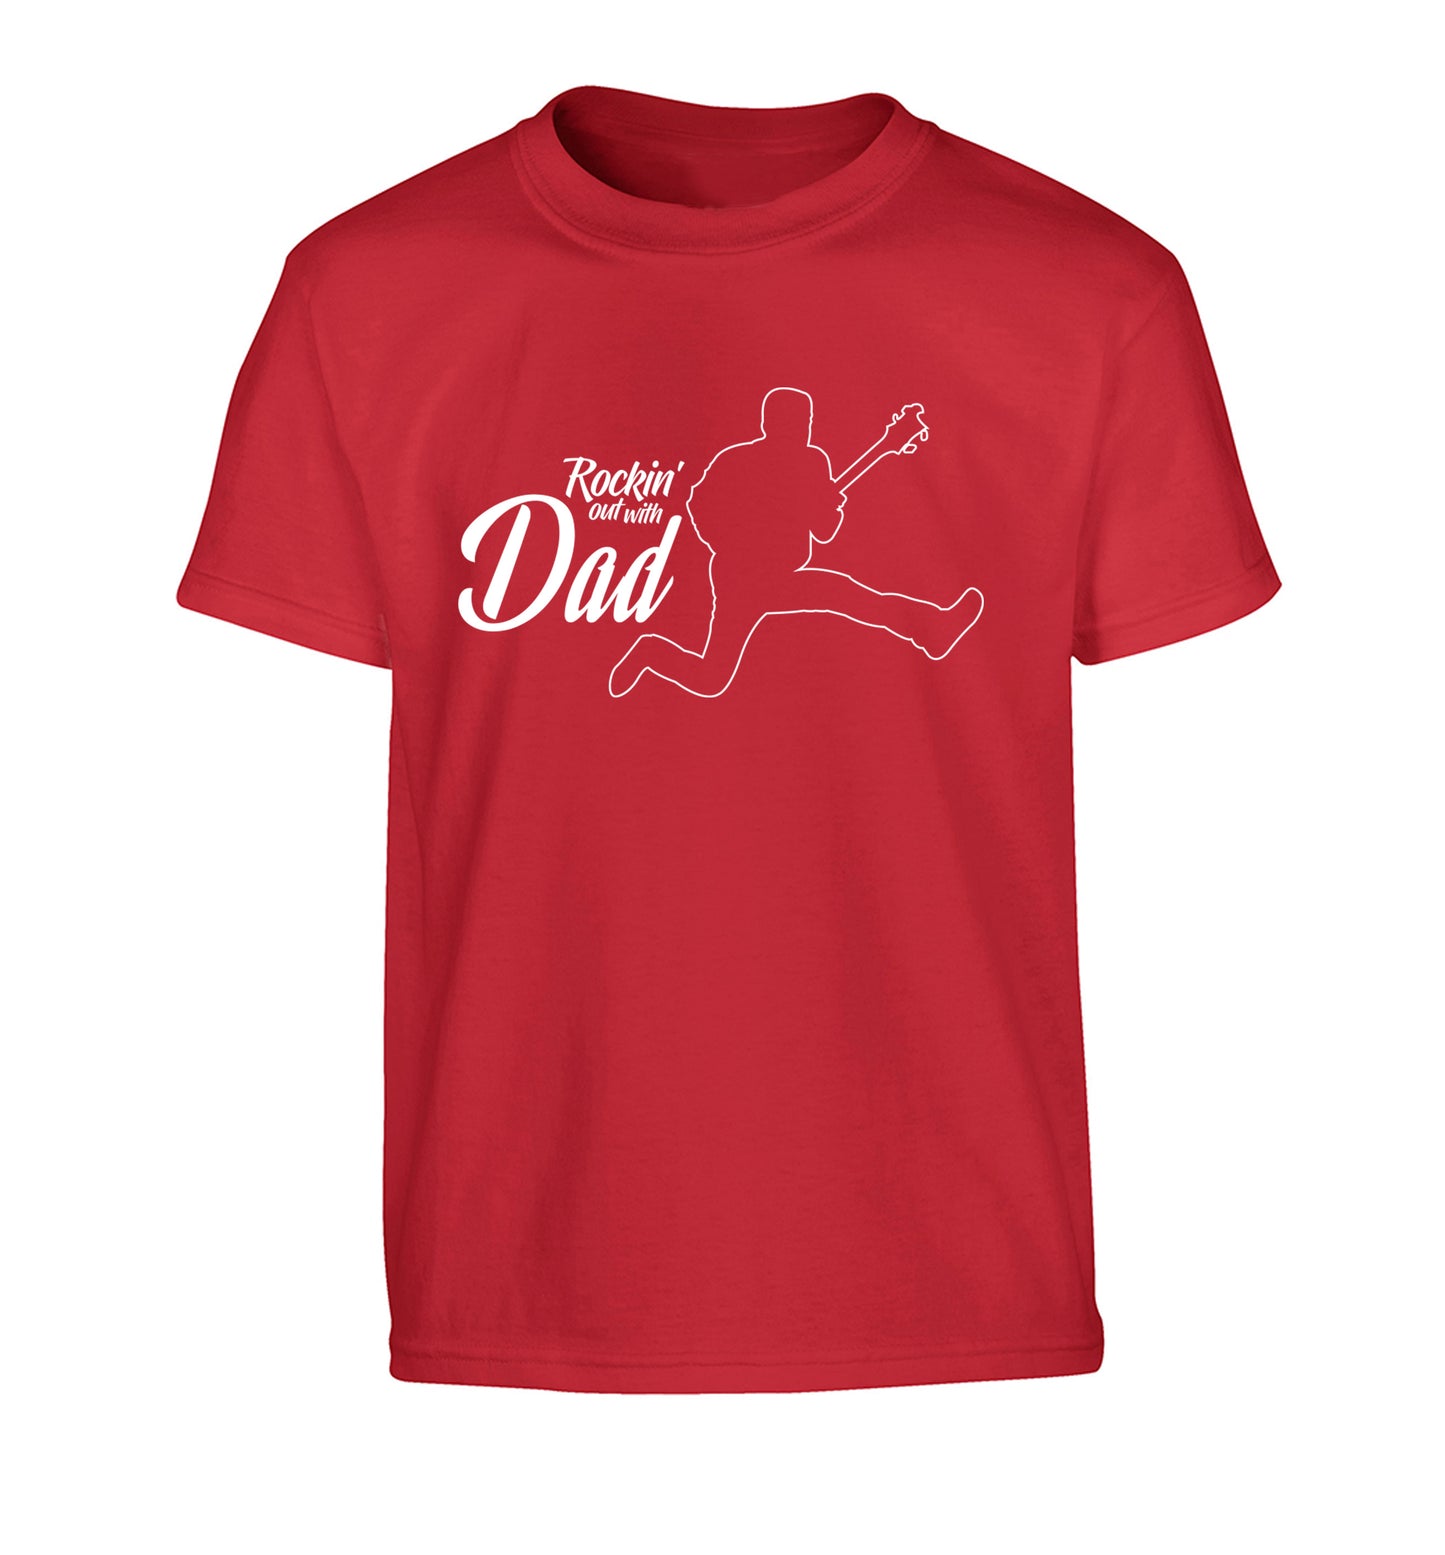 Rockin out with dad Children's red Tshirt 12-13 Years